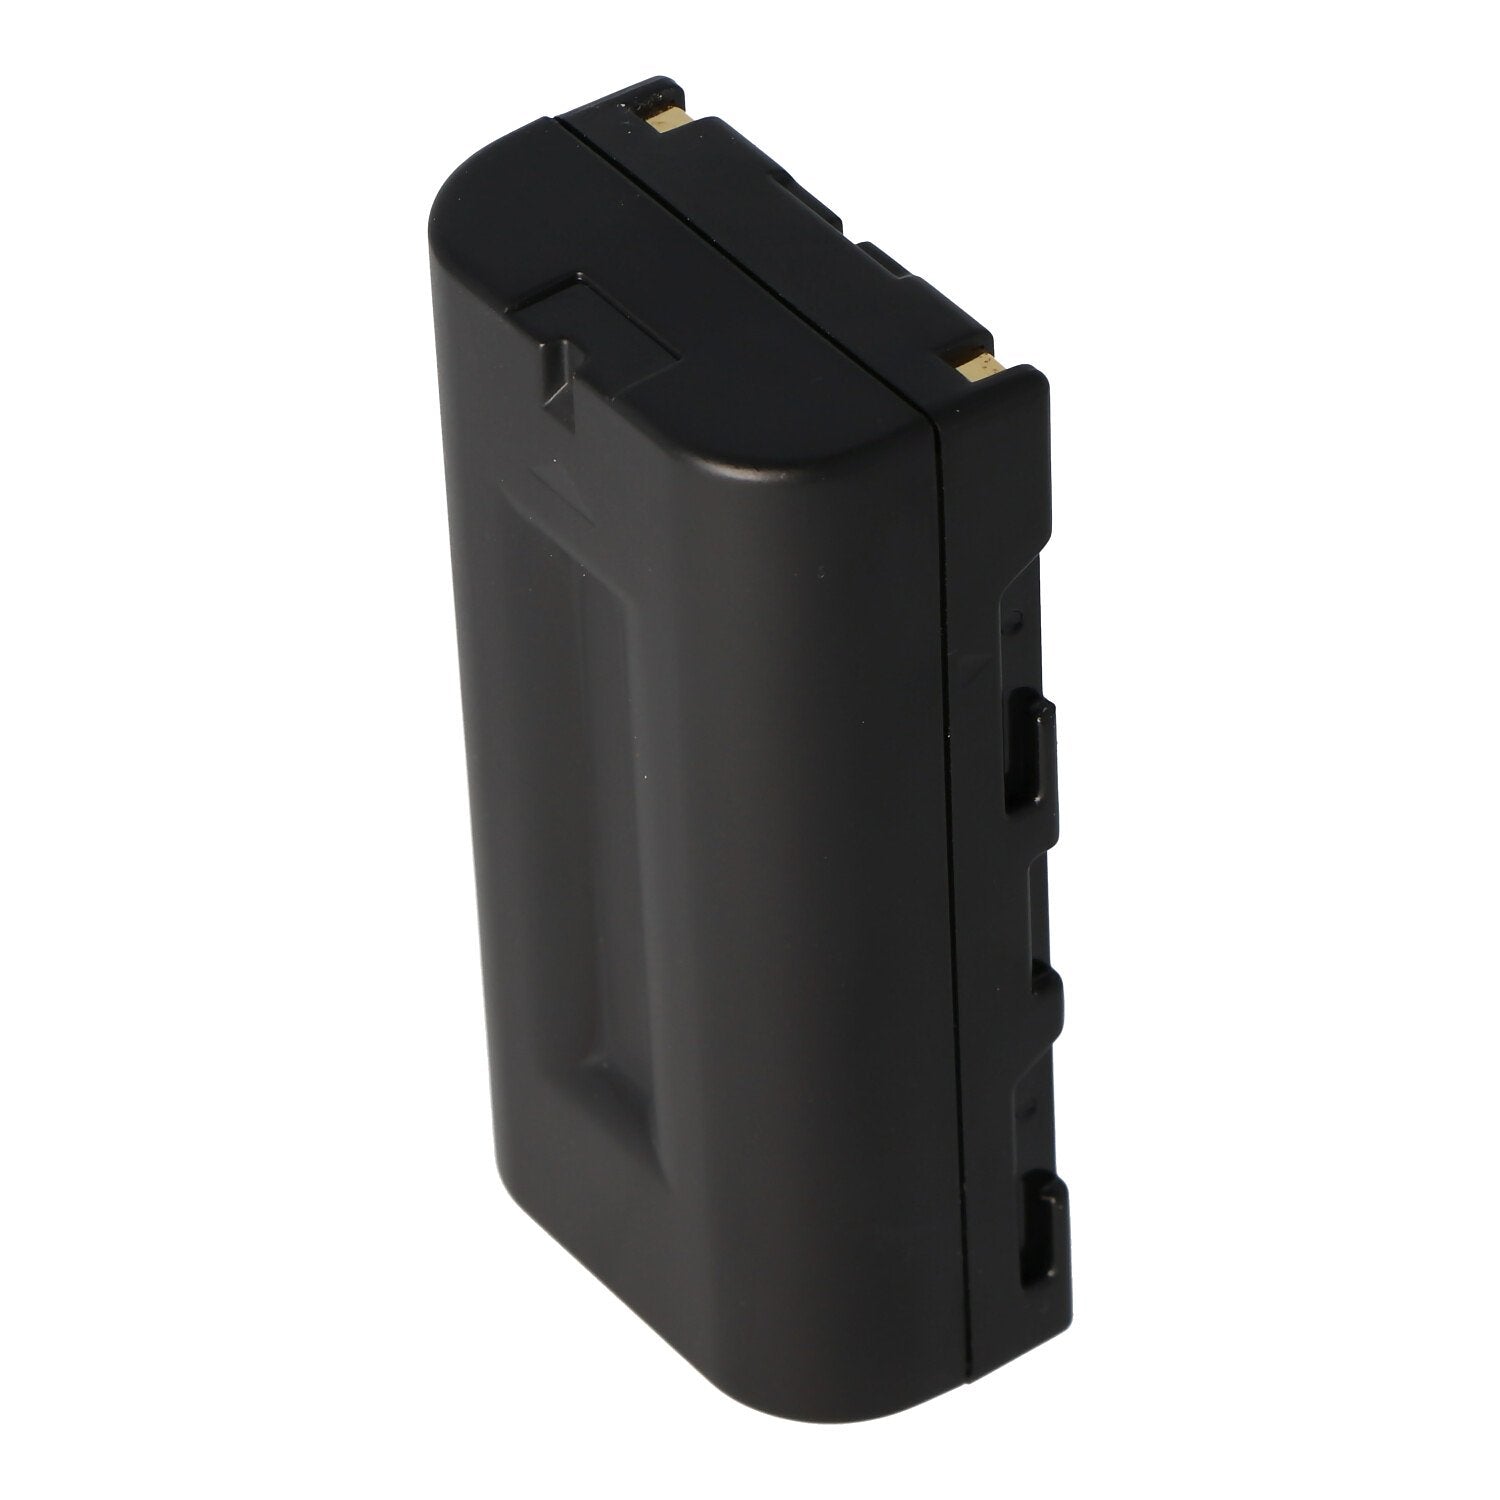 AccuCell battery suitable for Sanyo UR-121D, UR-124, IDC-1000Z